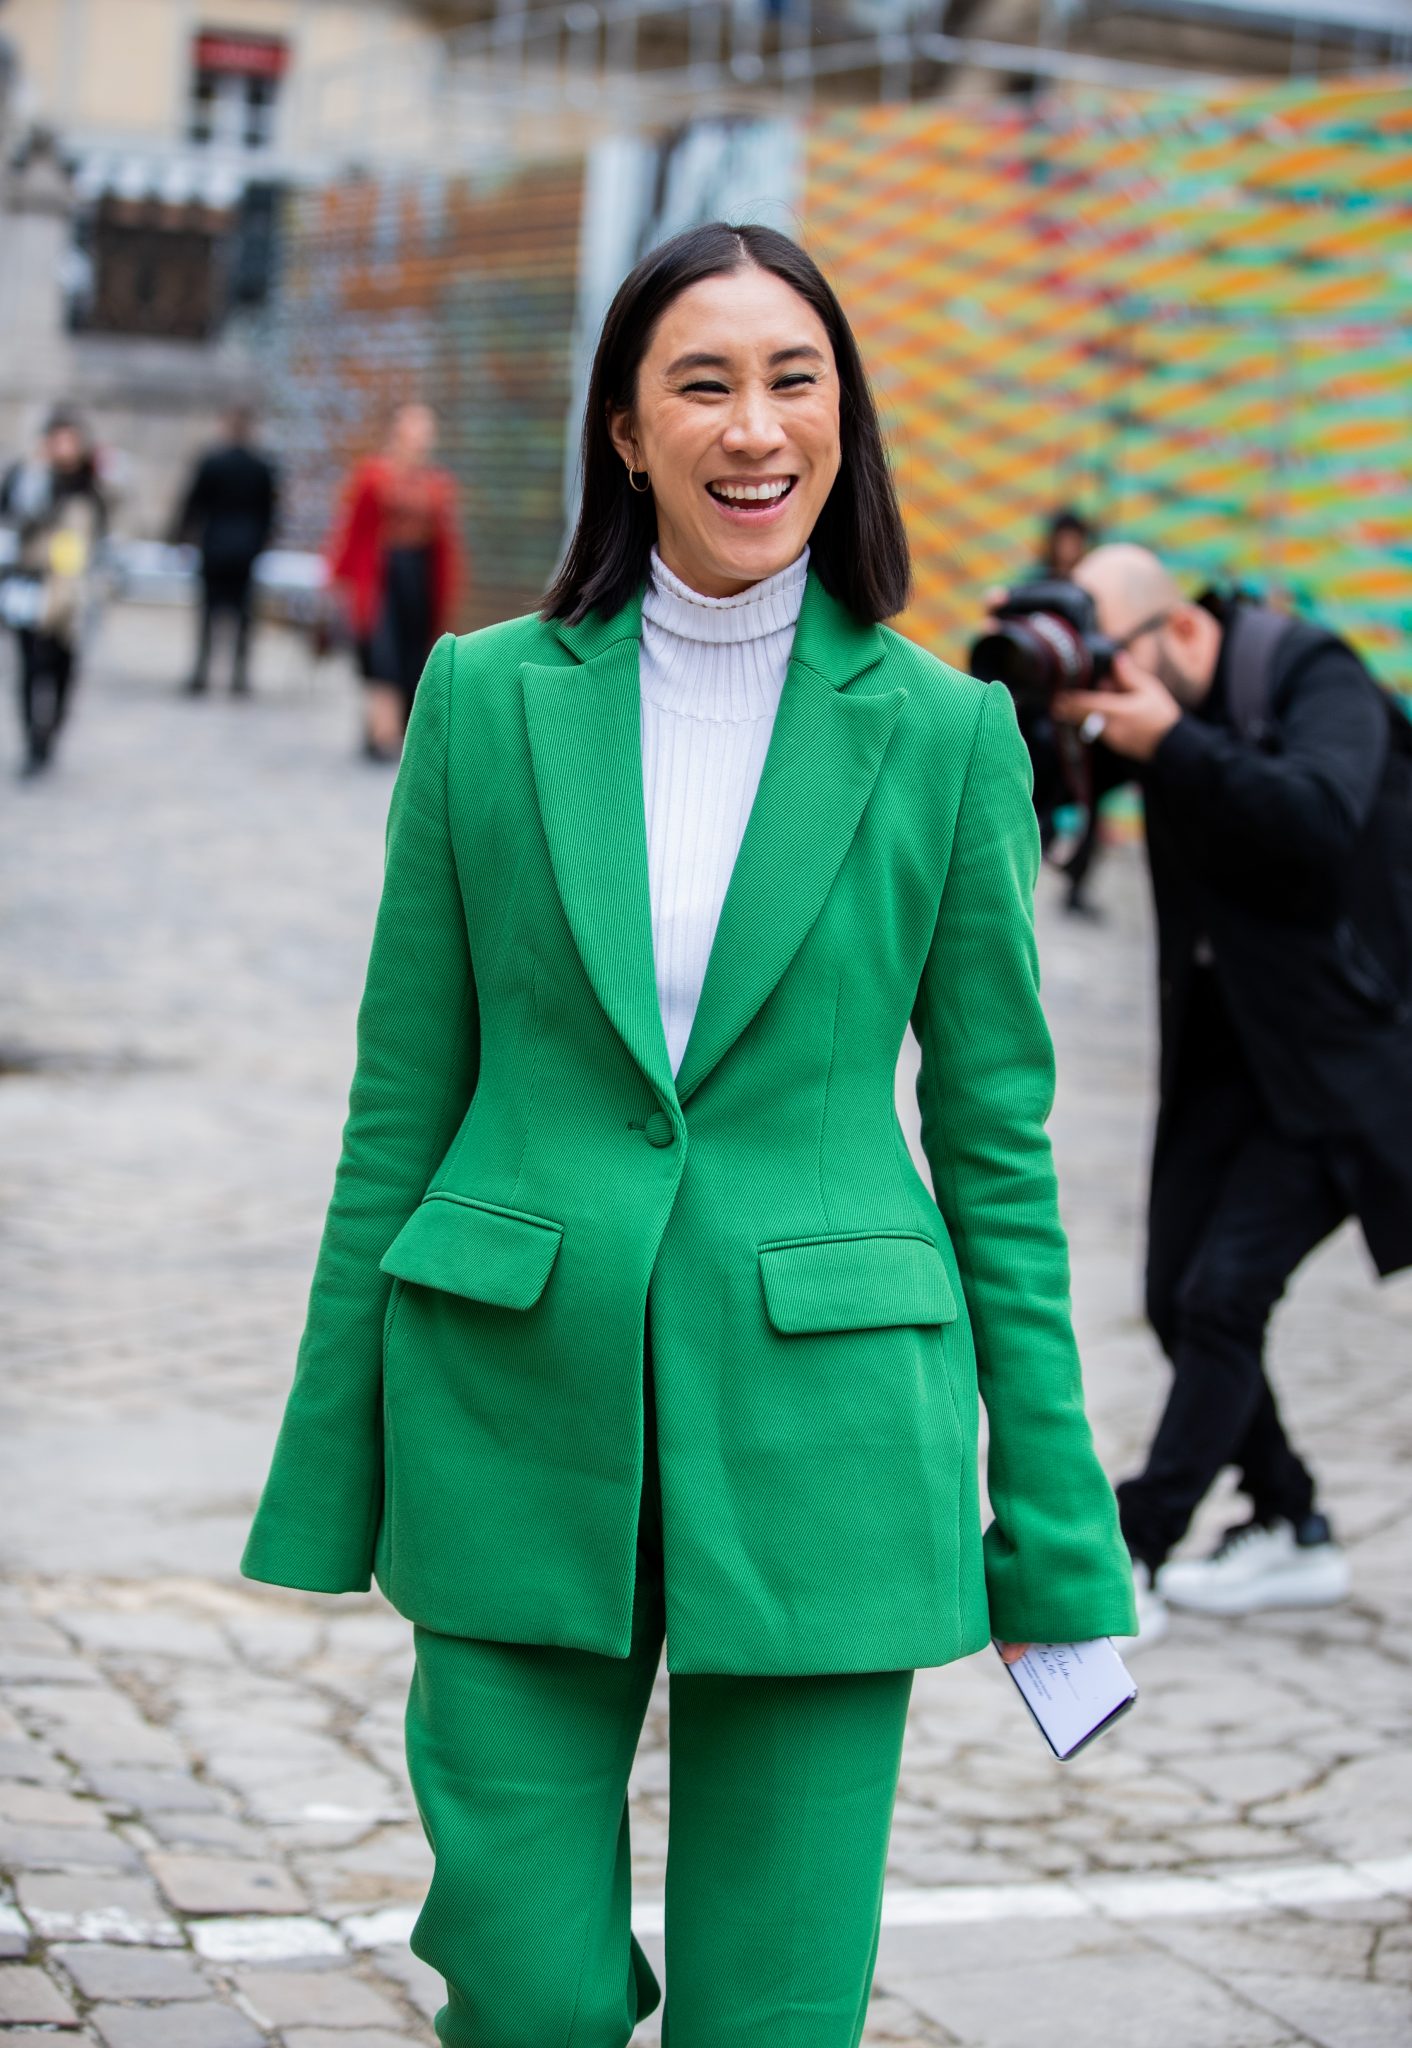 Office outfit inspiration: What to wear for work in 2020